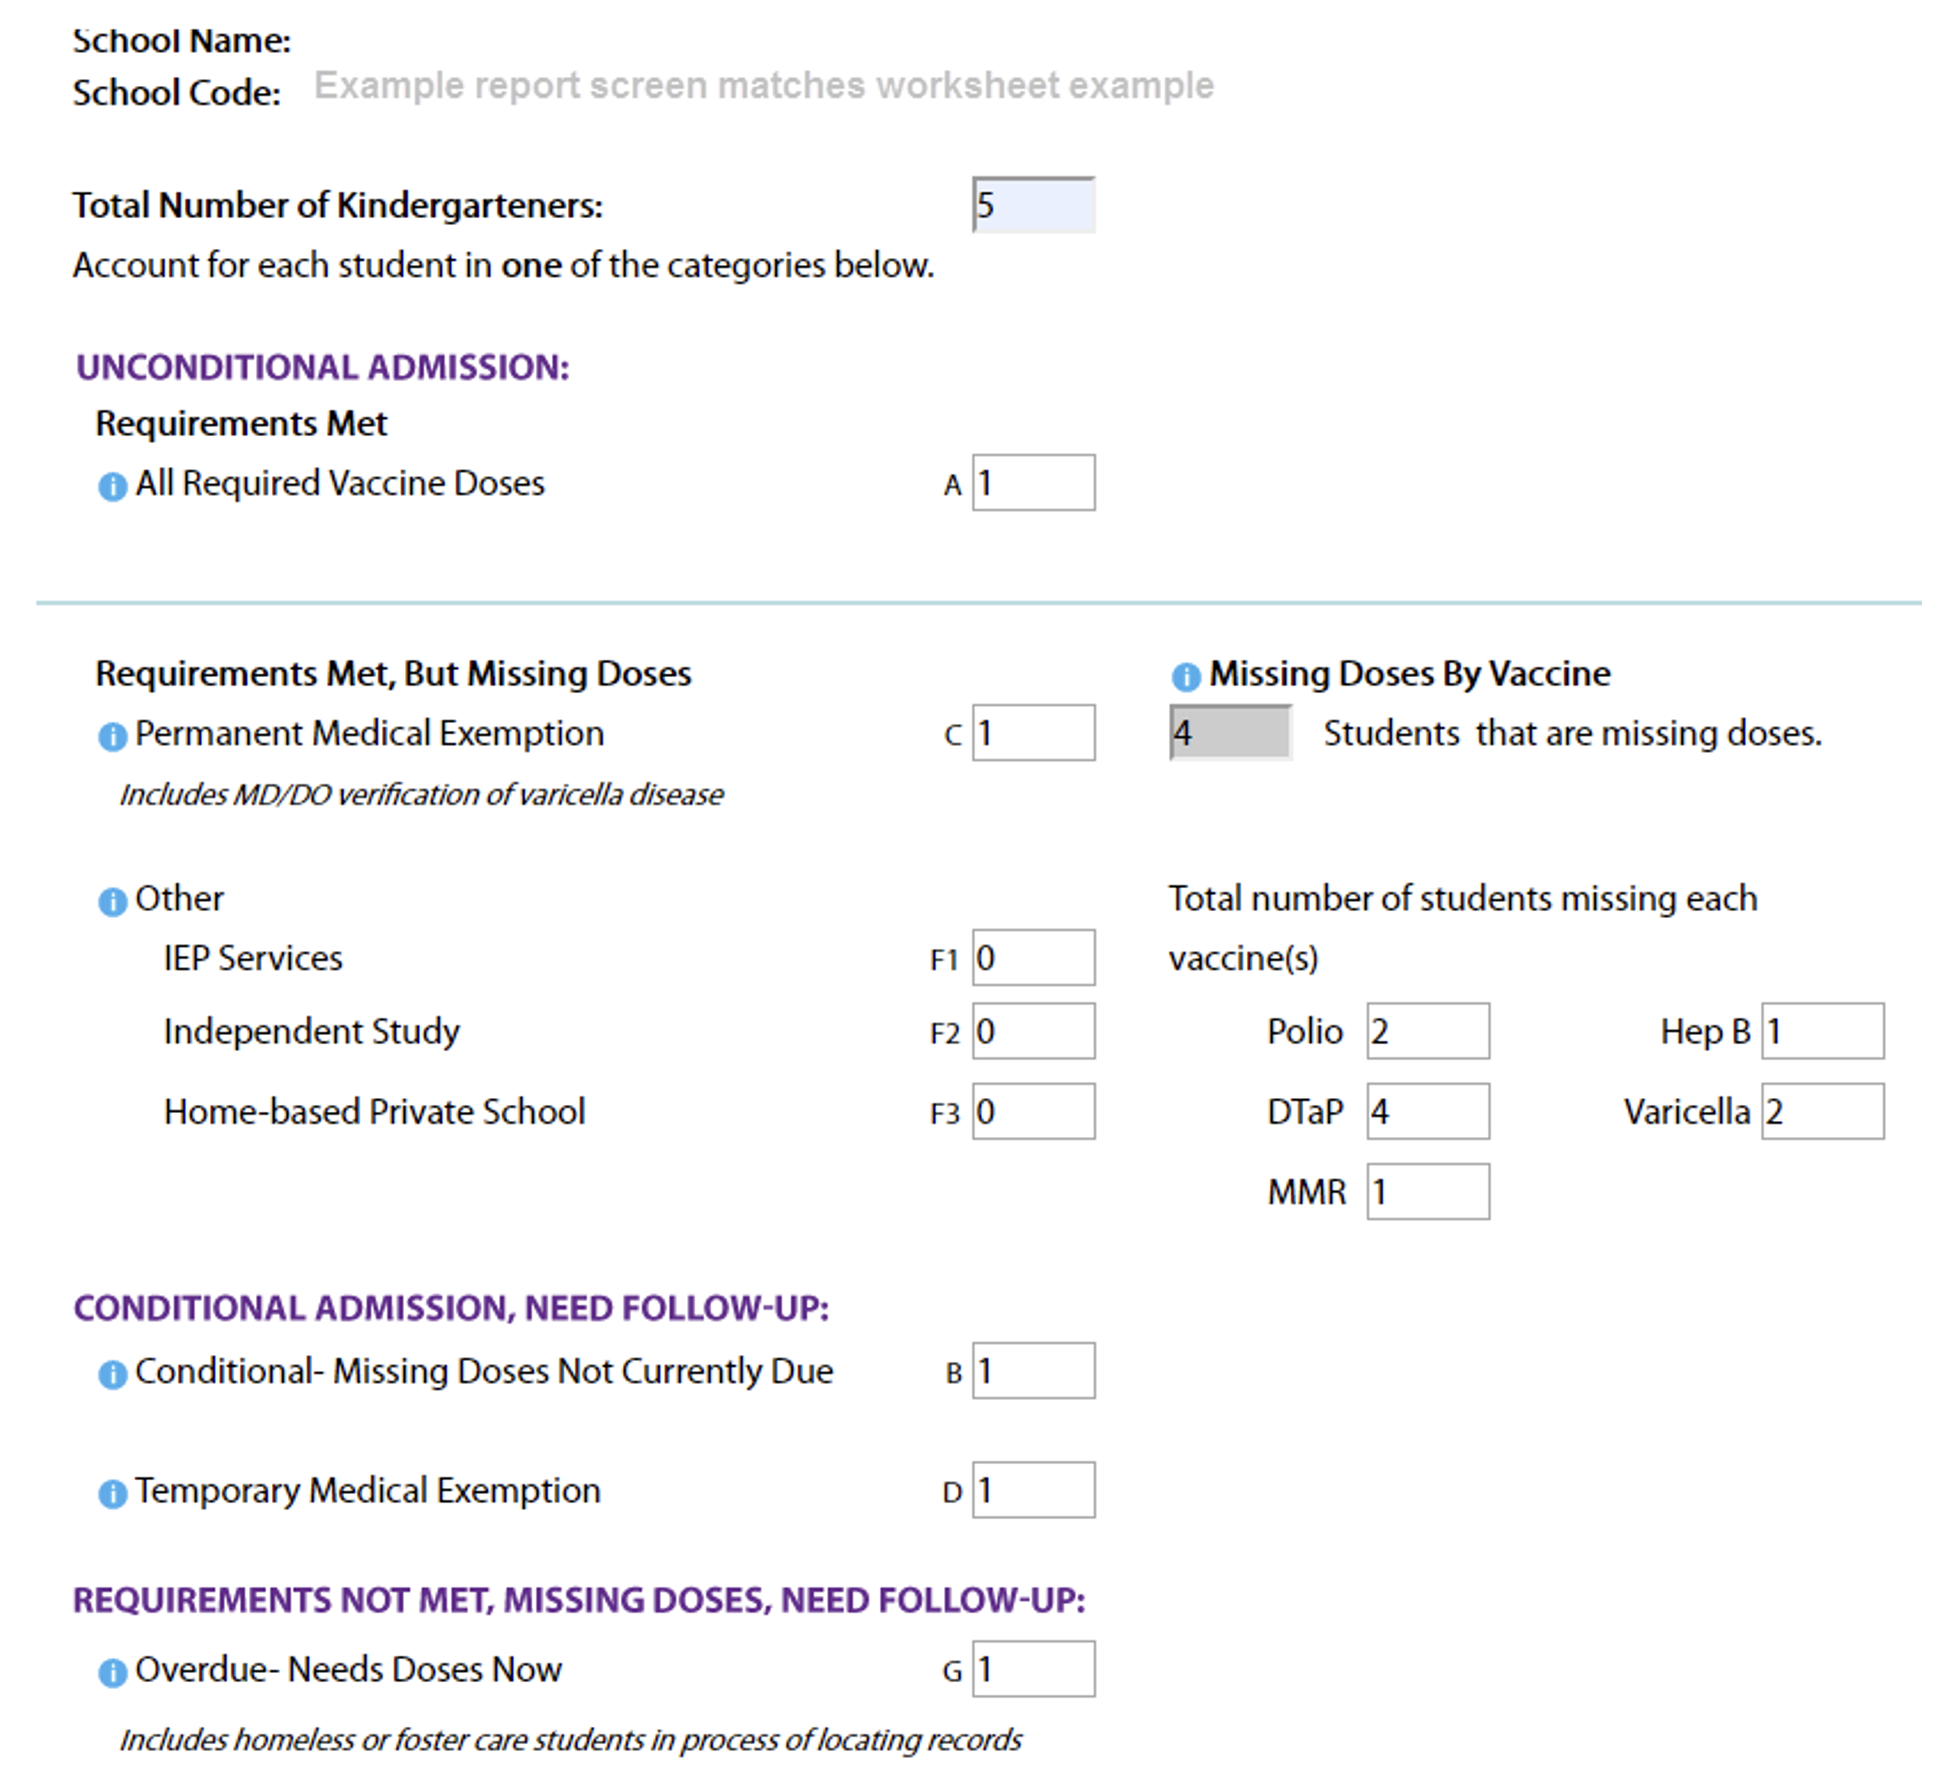 Transitional K Screen Matches worksheet example